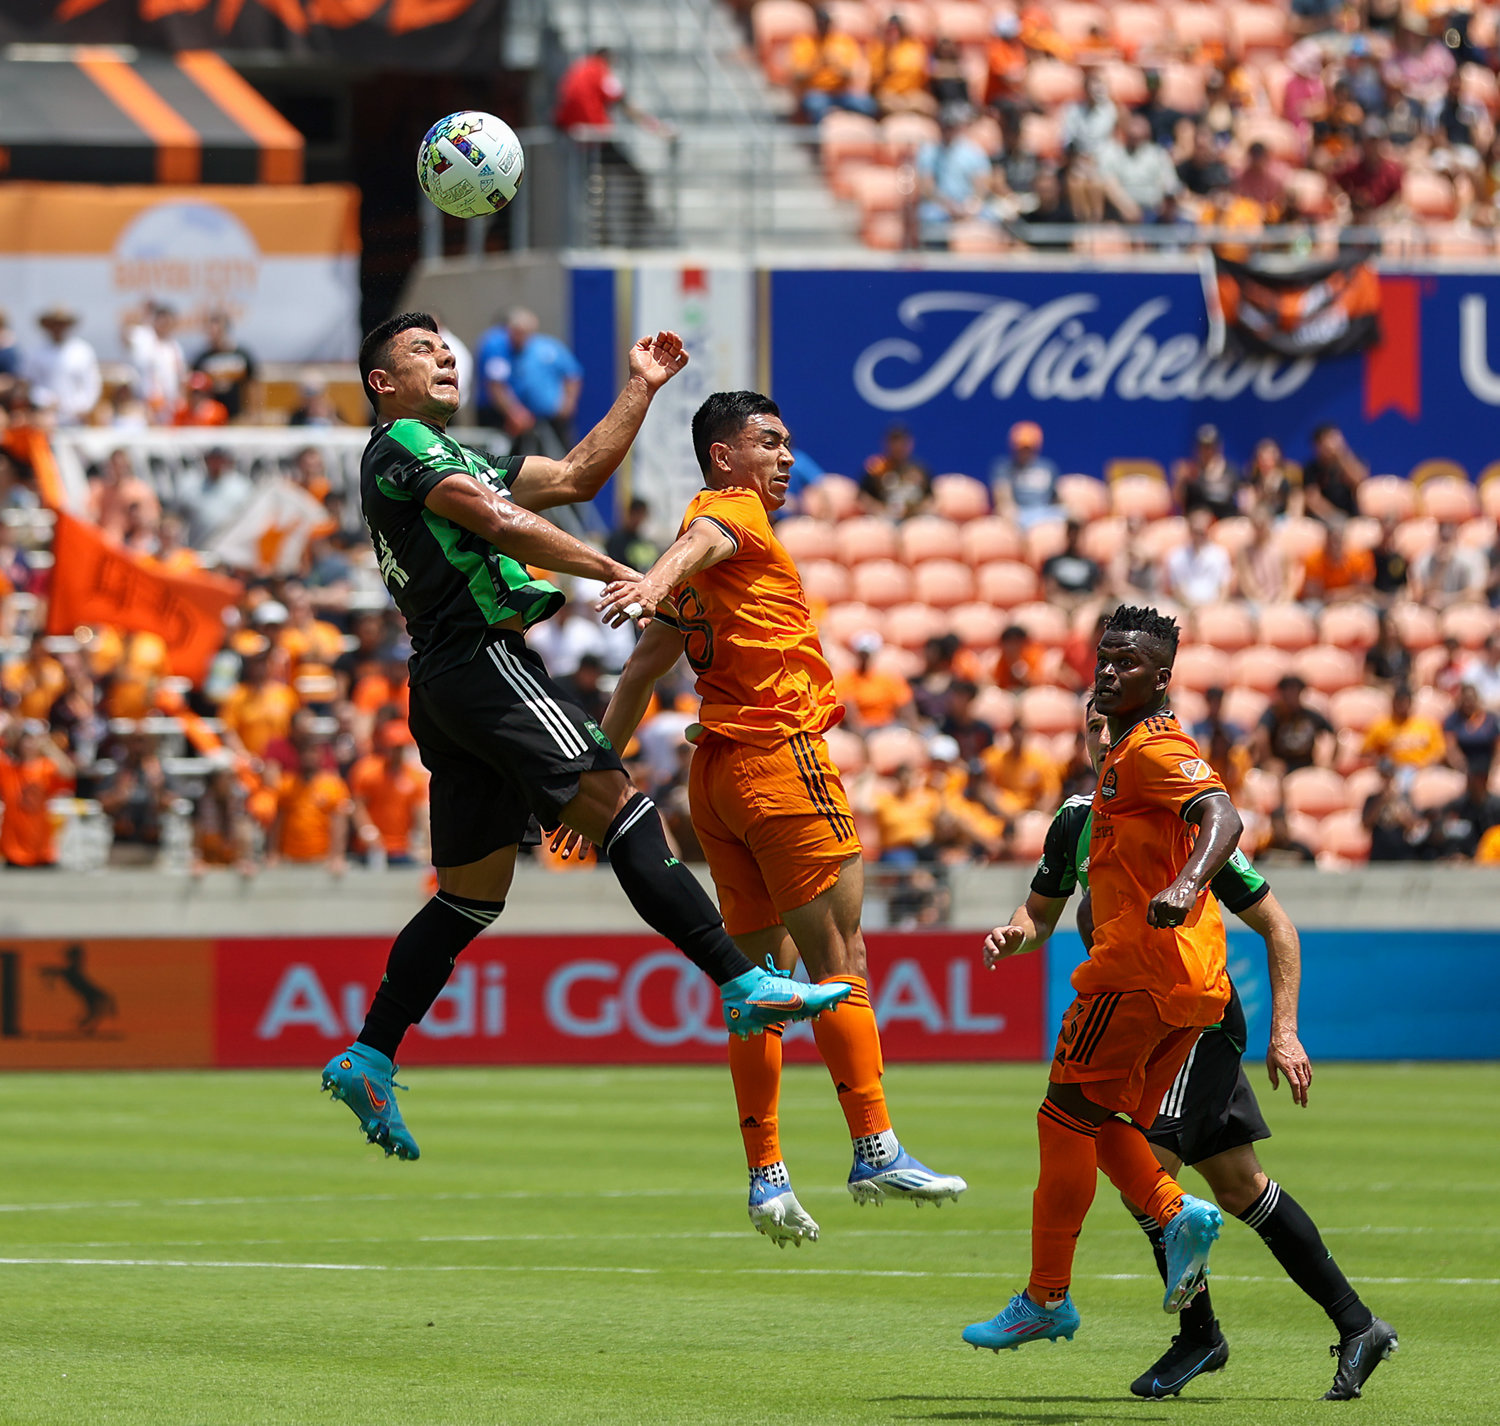 Austin FC defender Nick Lima (24) leaps to head the ball in the first half of a Major League Soccer match between the Houston Dynamo and Austin FC on April 30, 2022 in Houston, Texas.